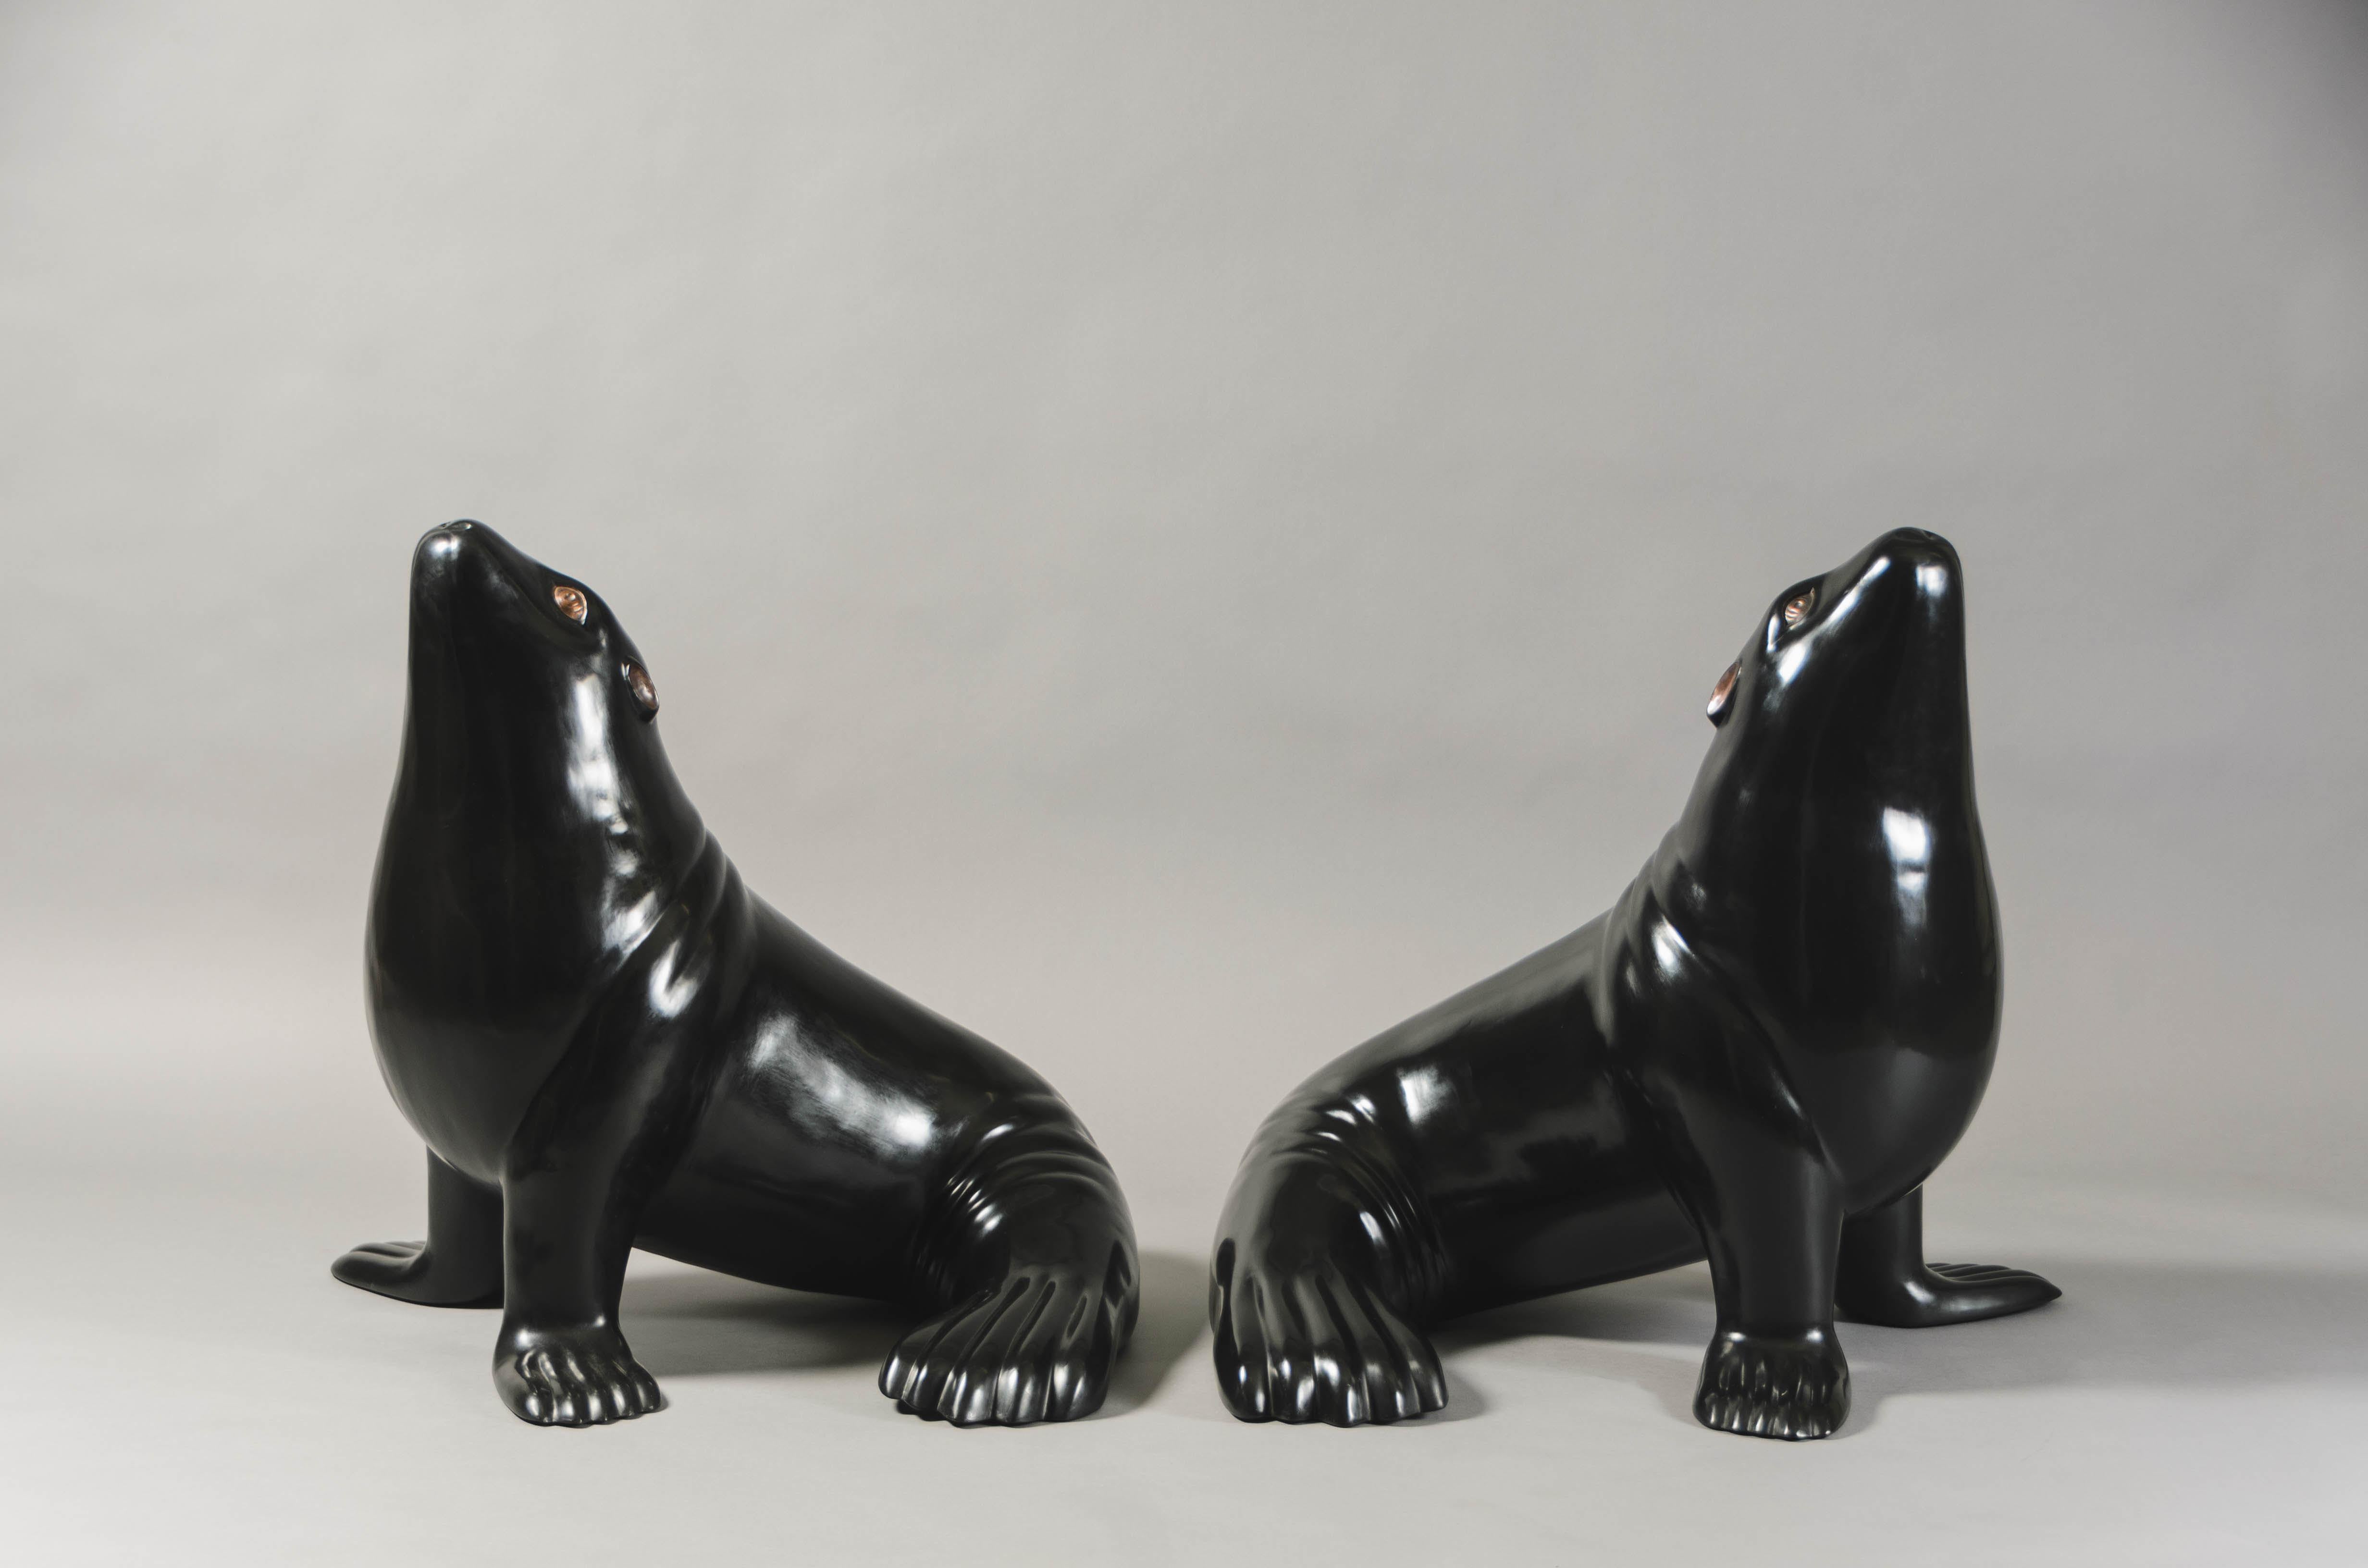 Contemporary Black Lacquer Sea Lion Sculpture by Robert Kuo, Limited Edition In New Condition For Sale In Los Angeles, CA